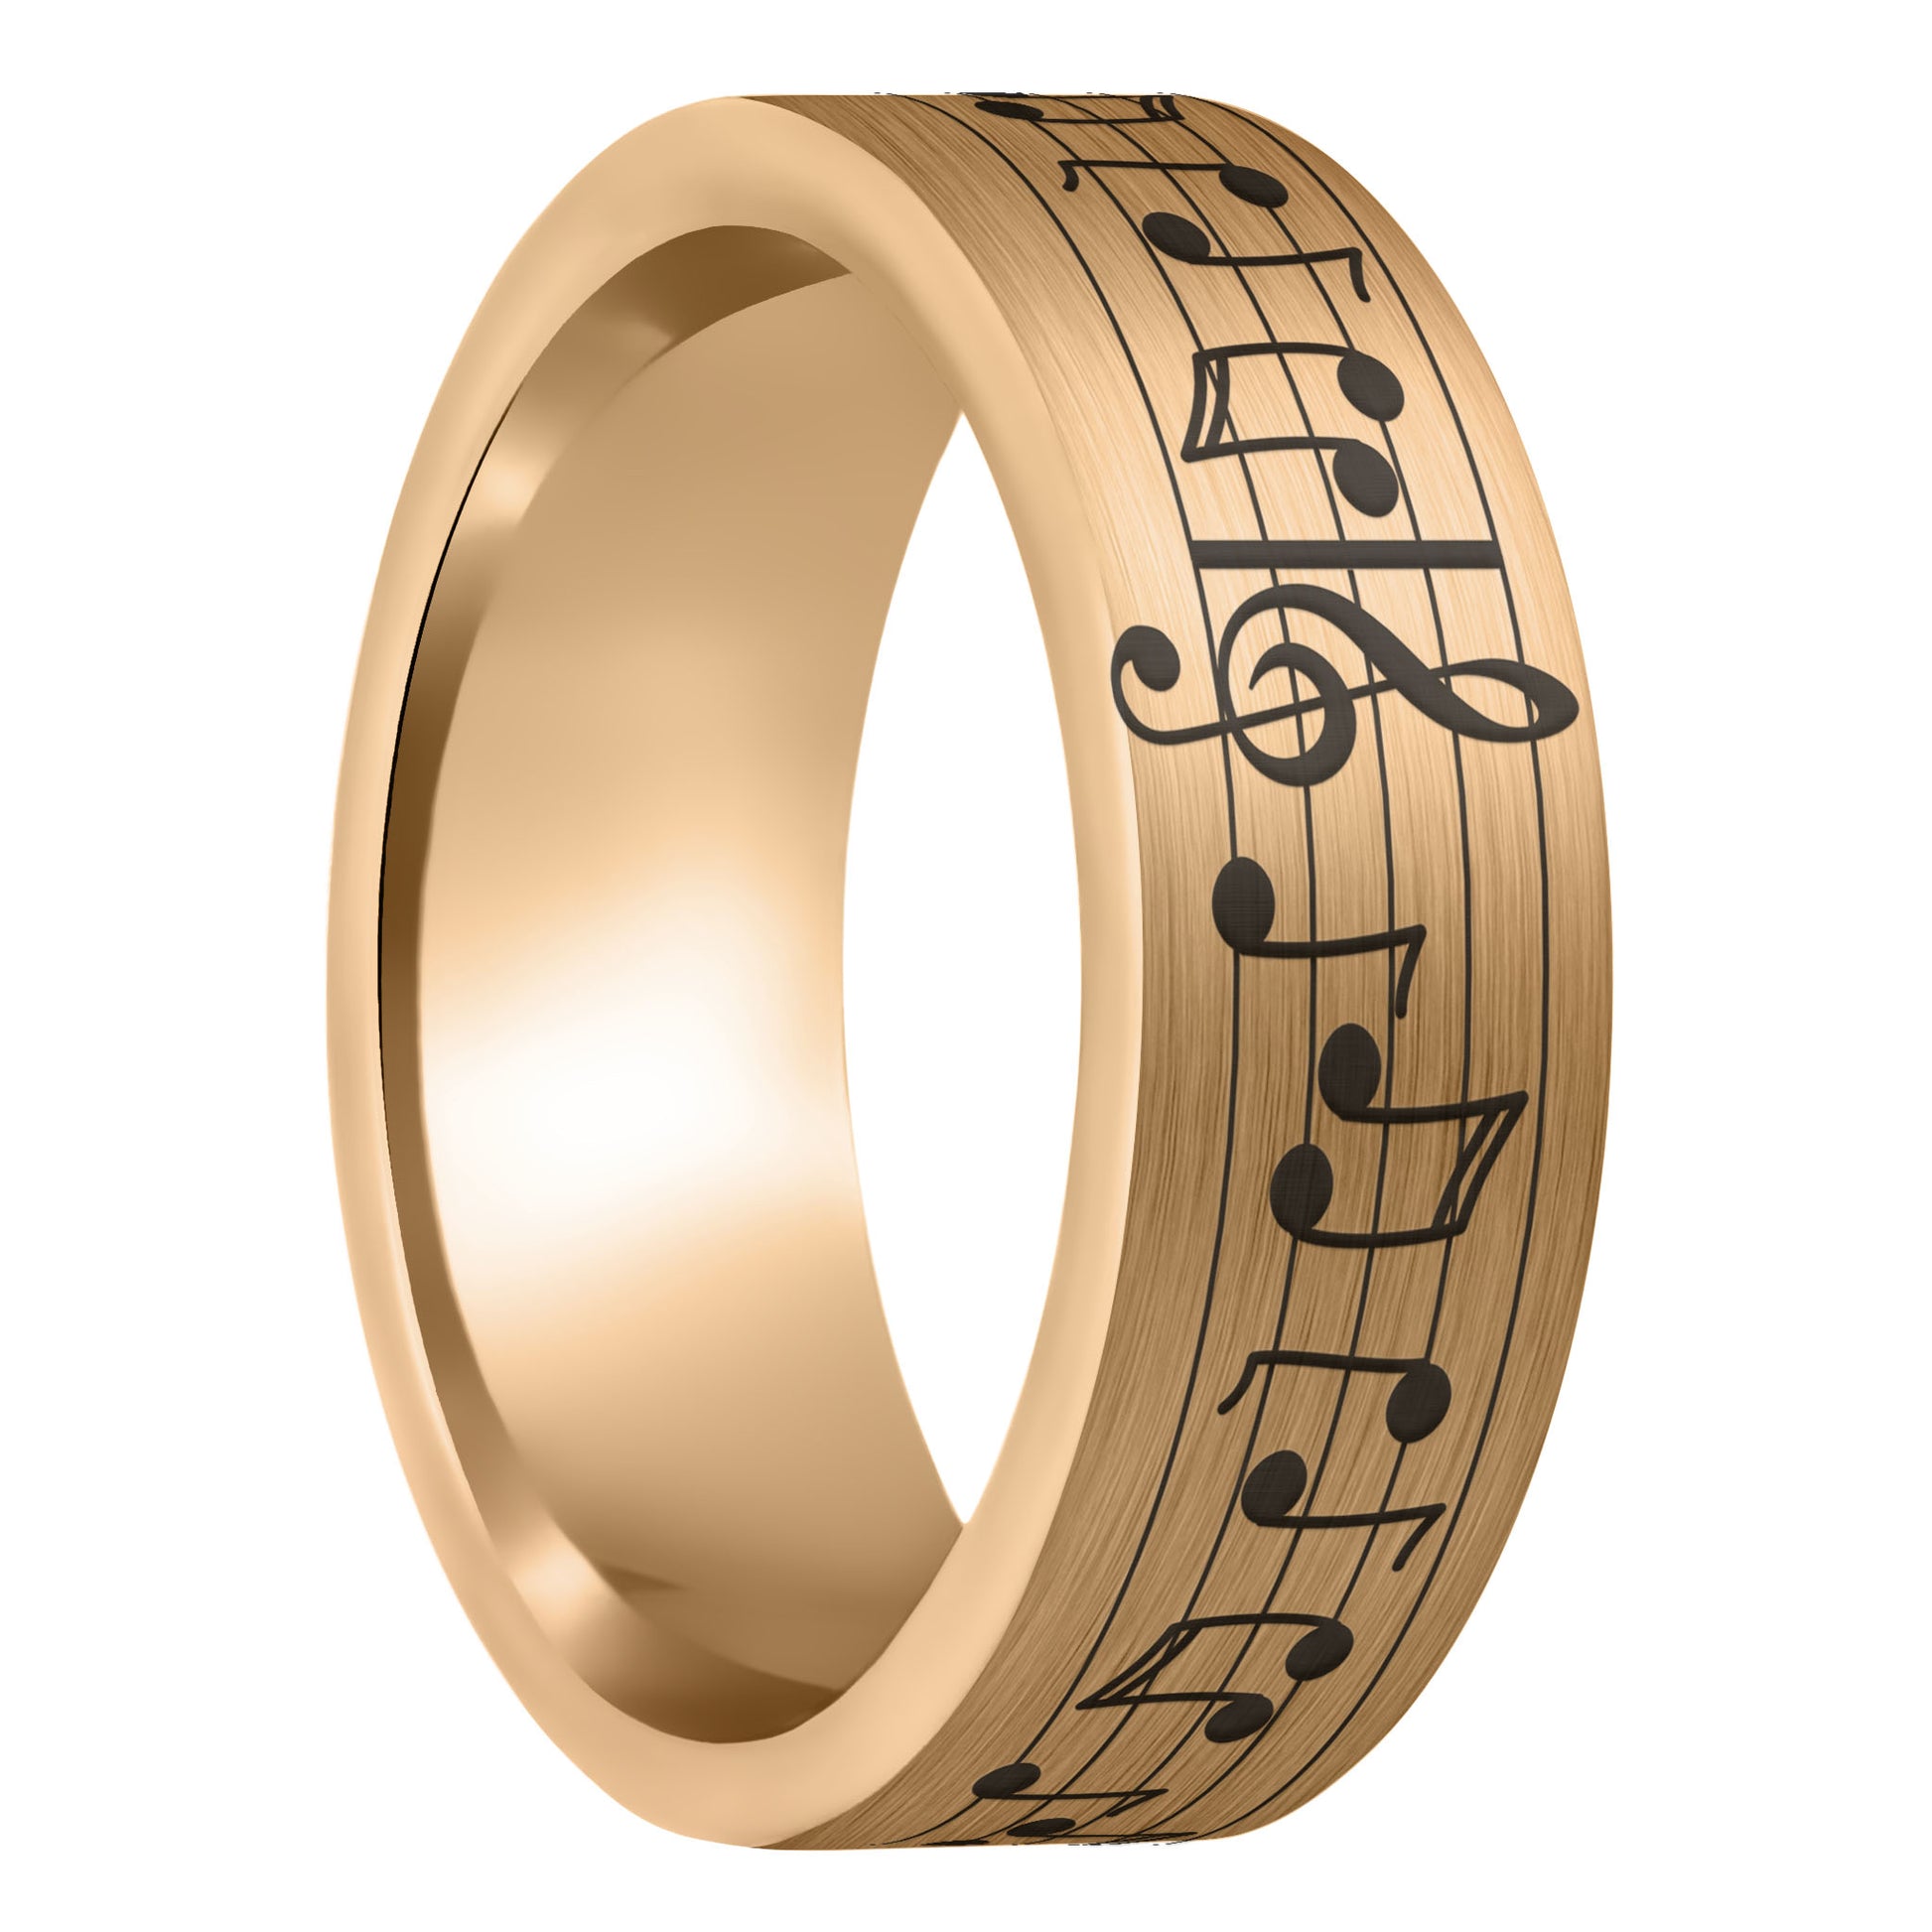 A music notes brushed rose gold tungsten men's wedding band displayed on a plain white background.